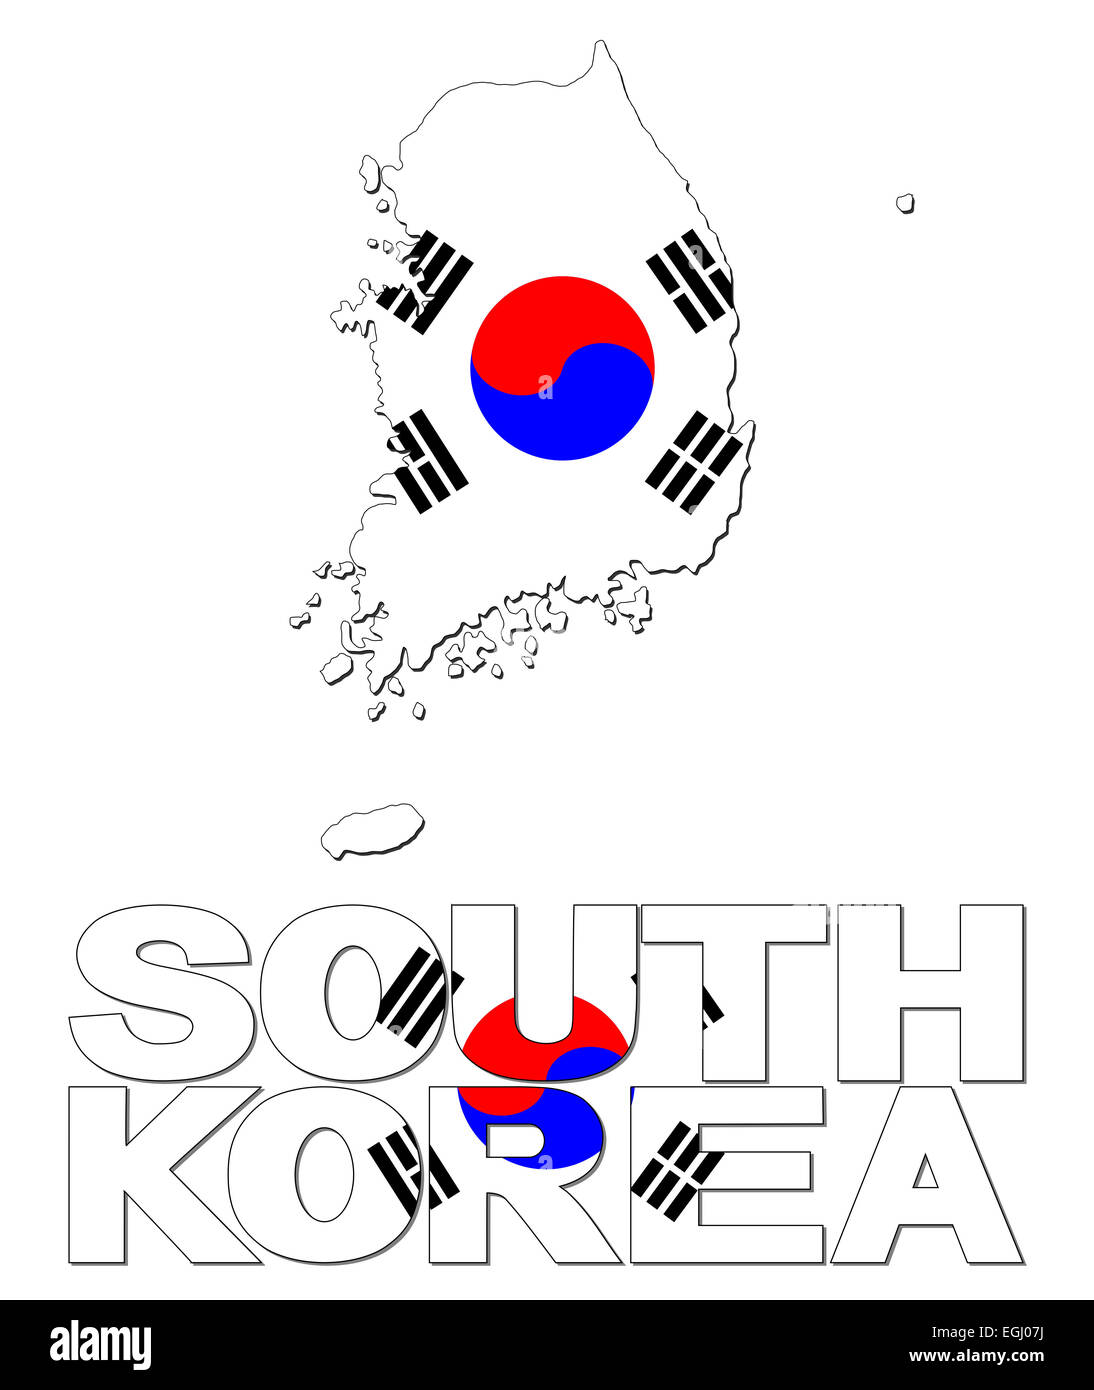 South Korea map flag and text illustration Stock Photo